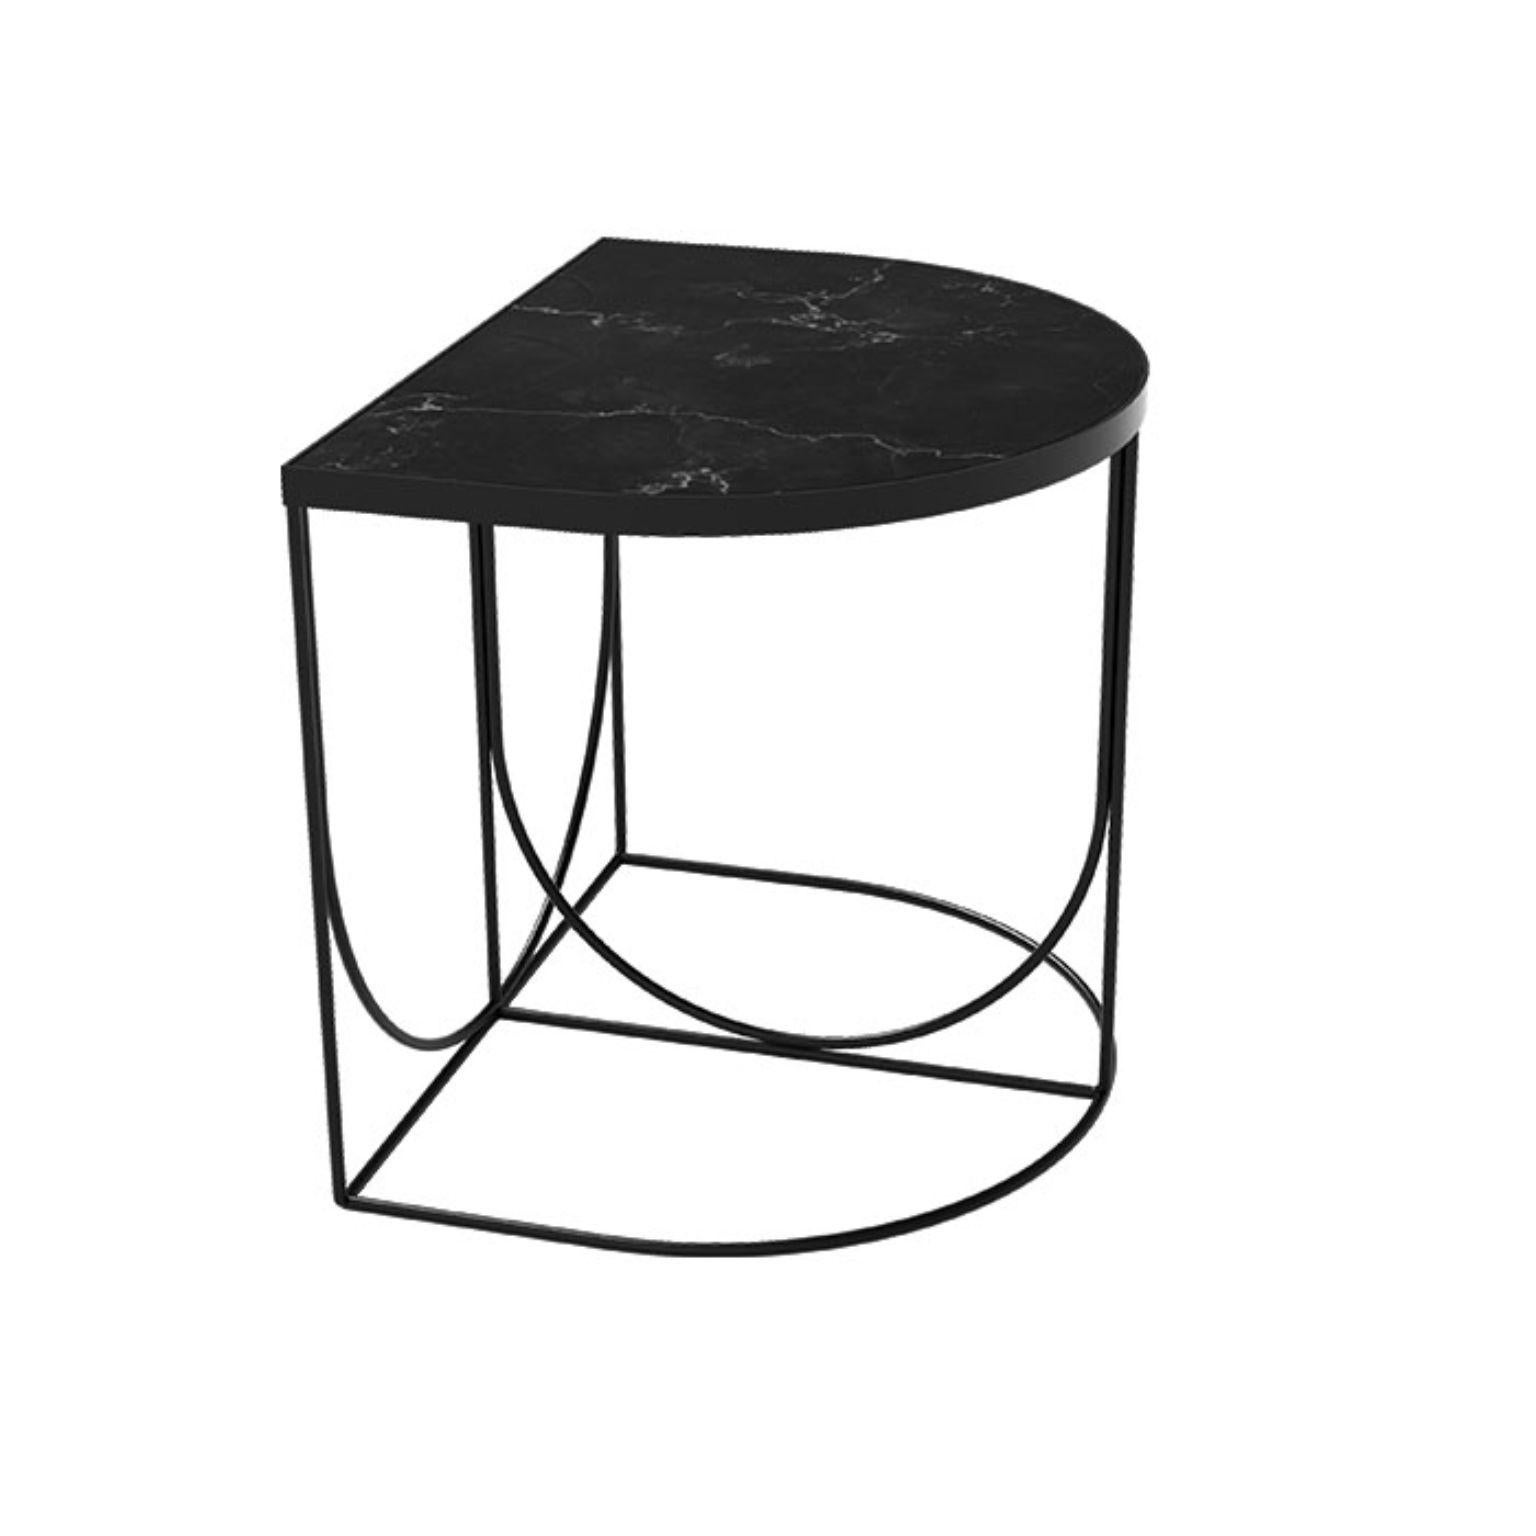 Black marble and steel Minimalist side table
Dimensions: L 40 x W 50 x H 44.3 cm
Materials: Marble, steel  

This series consists of three different designs that you can combine in many different ways. The table tops come in two different